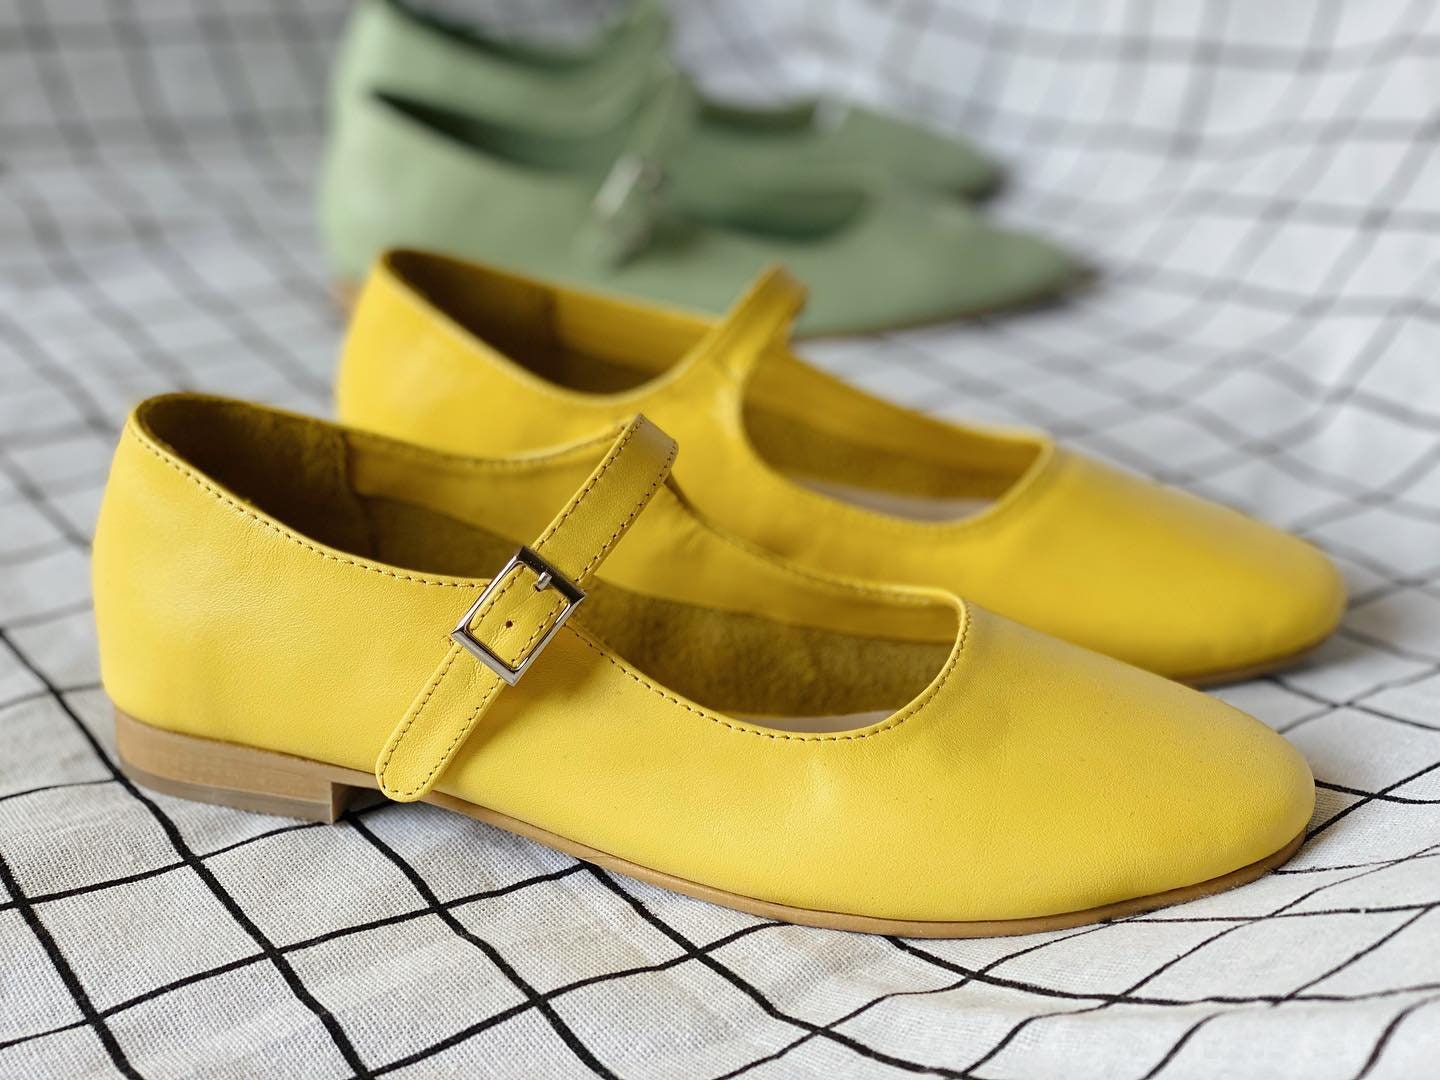 Womens Yellow Shoes.